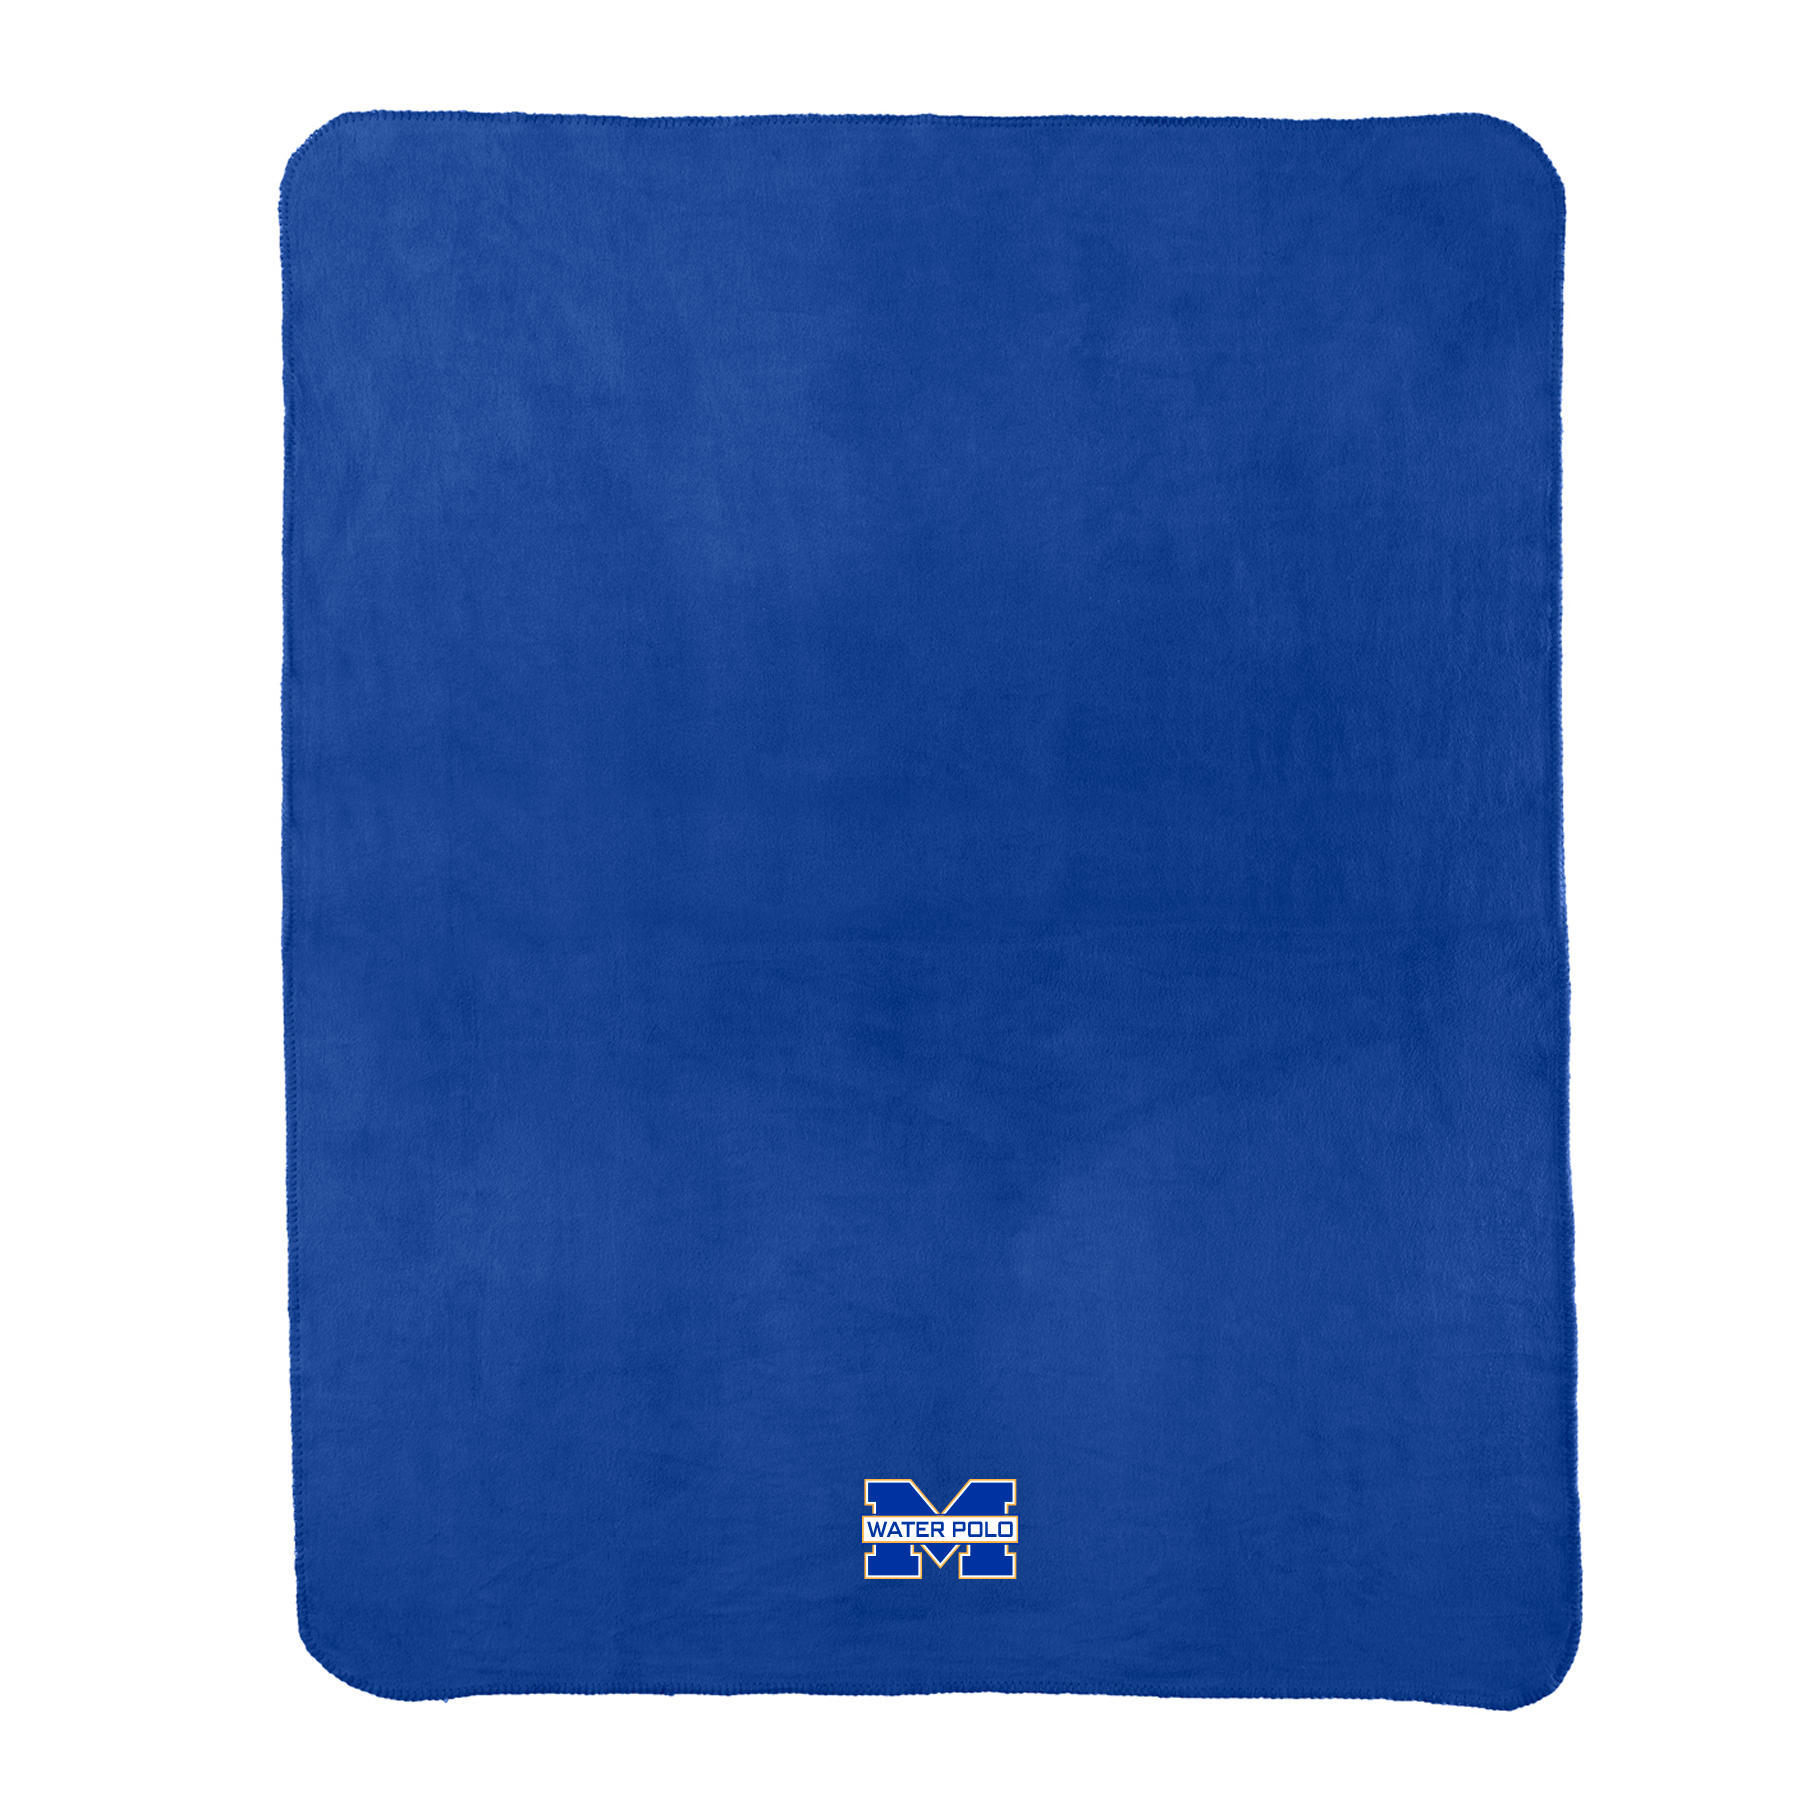 MIRA MESA WATER POLO - EMBROIDERED BLANKET WITH STRAP